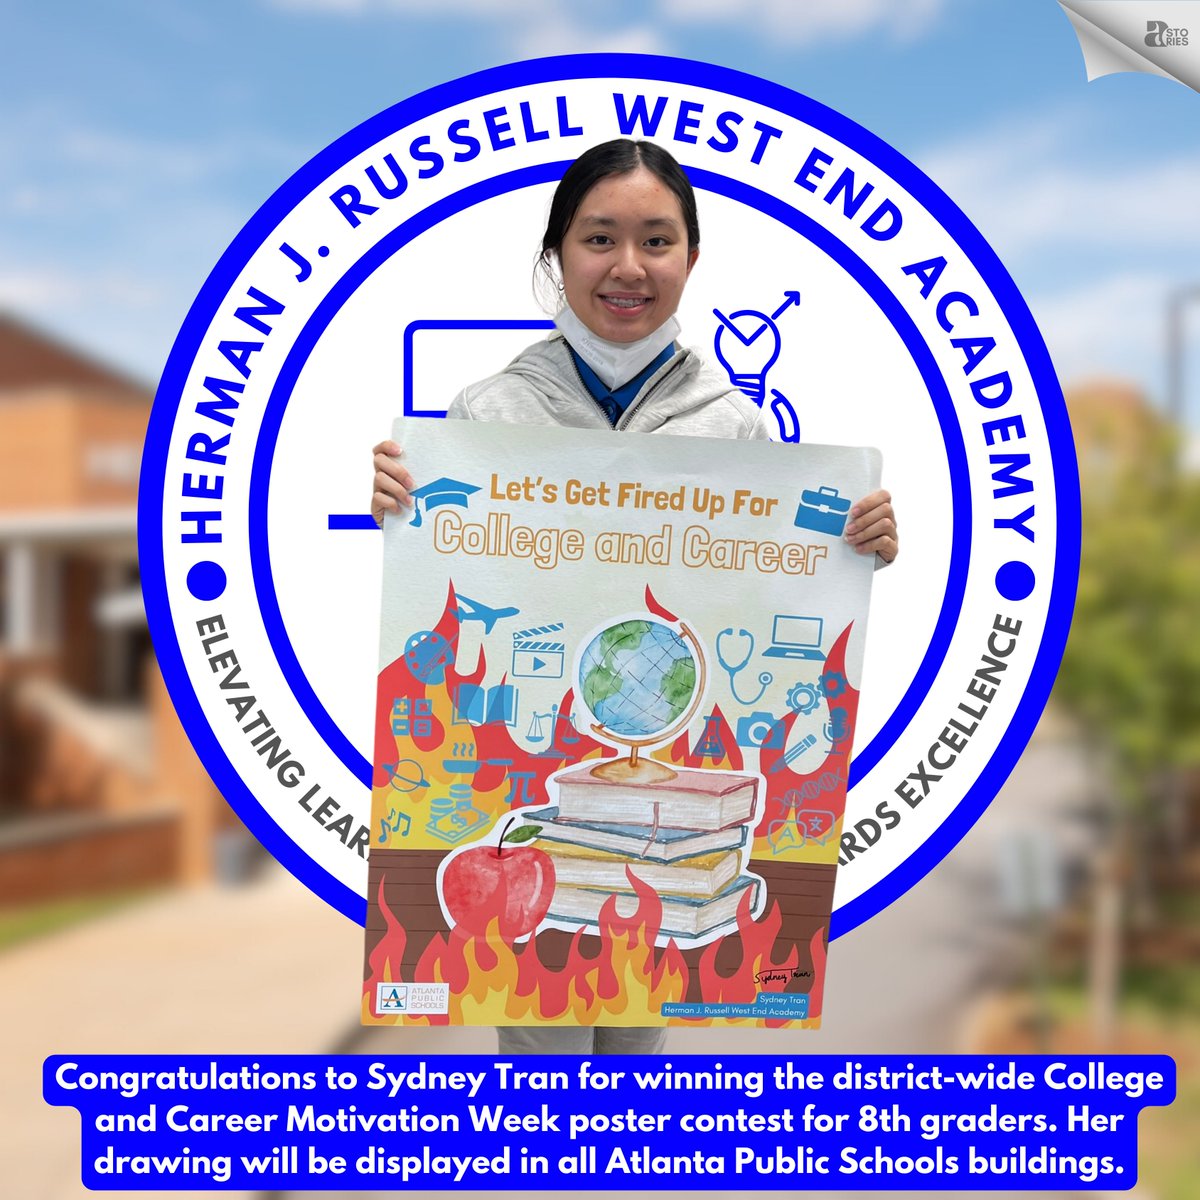 Congrats to Sydney Tran for winning the district-wide College and Career Motivation Week poster contest for 8th graders. Her drawing will be displayed in all Atlanta Public Schools buildings. @DRVENZEN_aps @TDGreen_ @Retha_Woolfolk @apsupdate @HJRussell_STEM @HRWEACOUNSELING